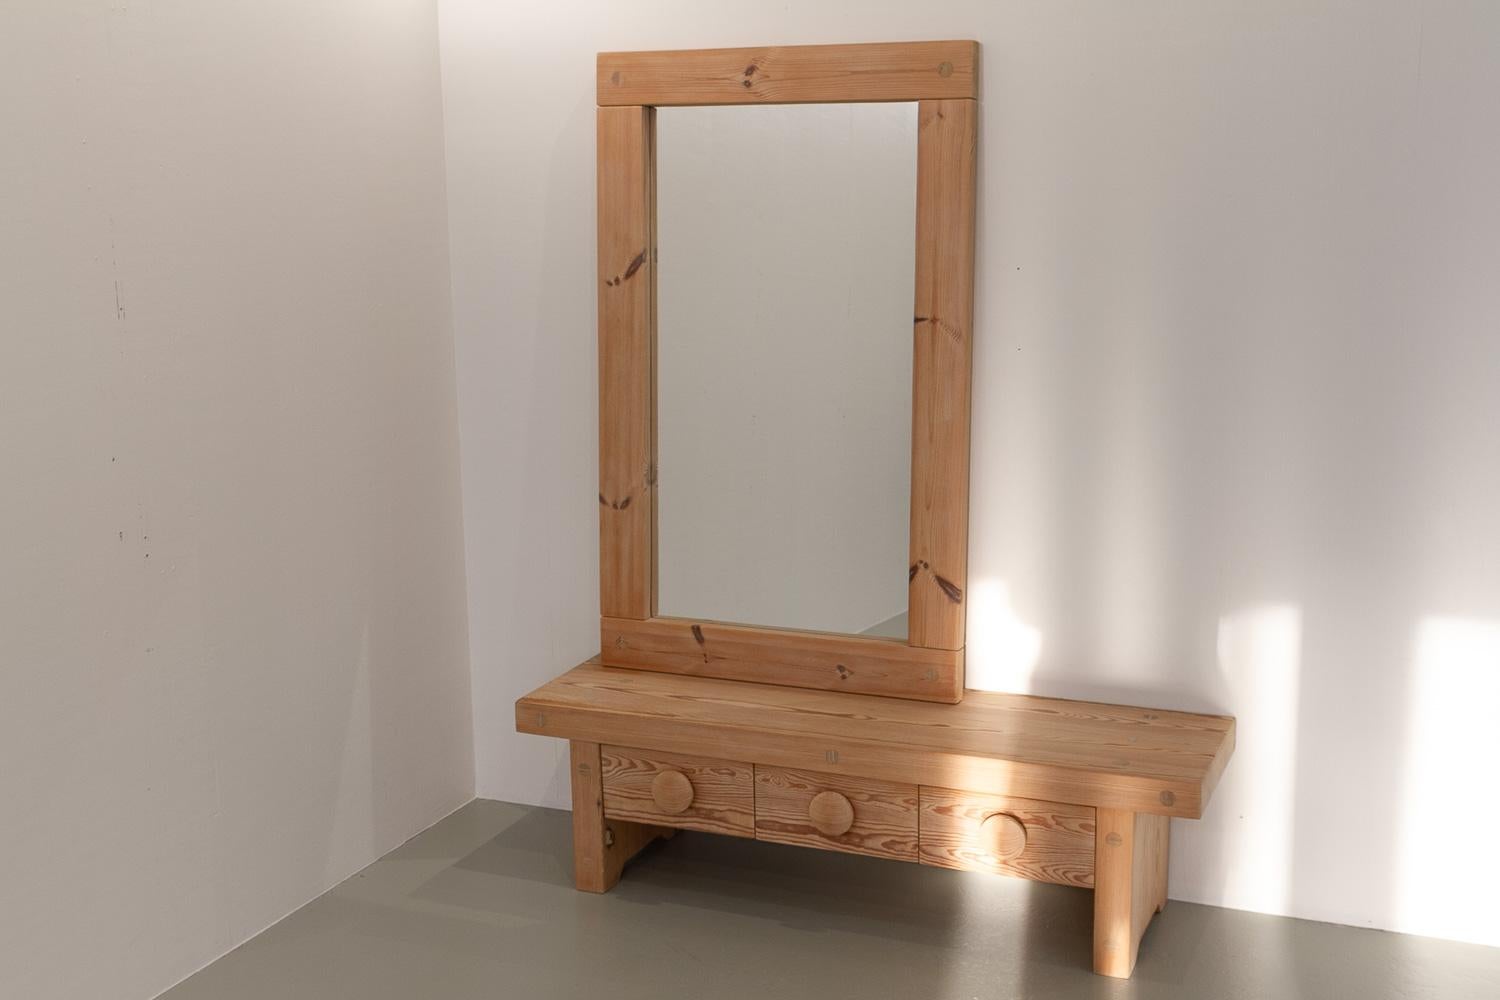 Swedish Modern Pine Bench and Mirror by Ruben Ward for Fröseke AB Nybro Fabriken, Sweden, 1970s.
Scandinavian Modern hallway set with bench and mirror in chunky solid Nordic pinewood. Bench with three drawers with large round pulls.
This rustic